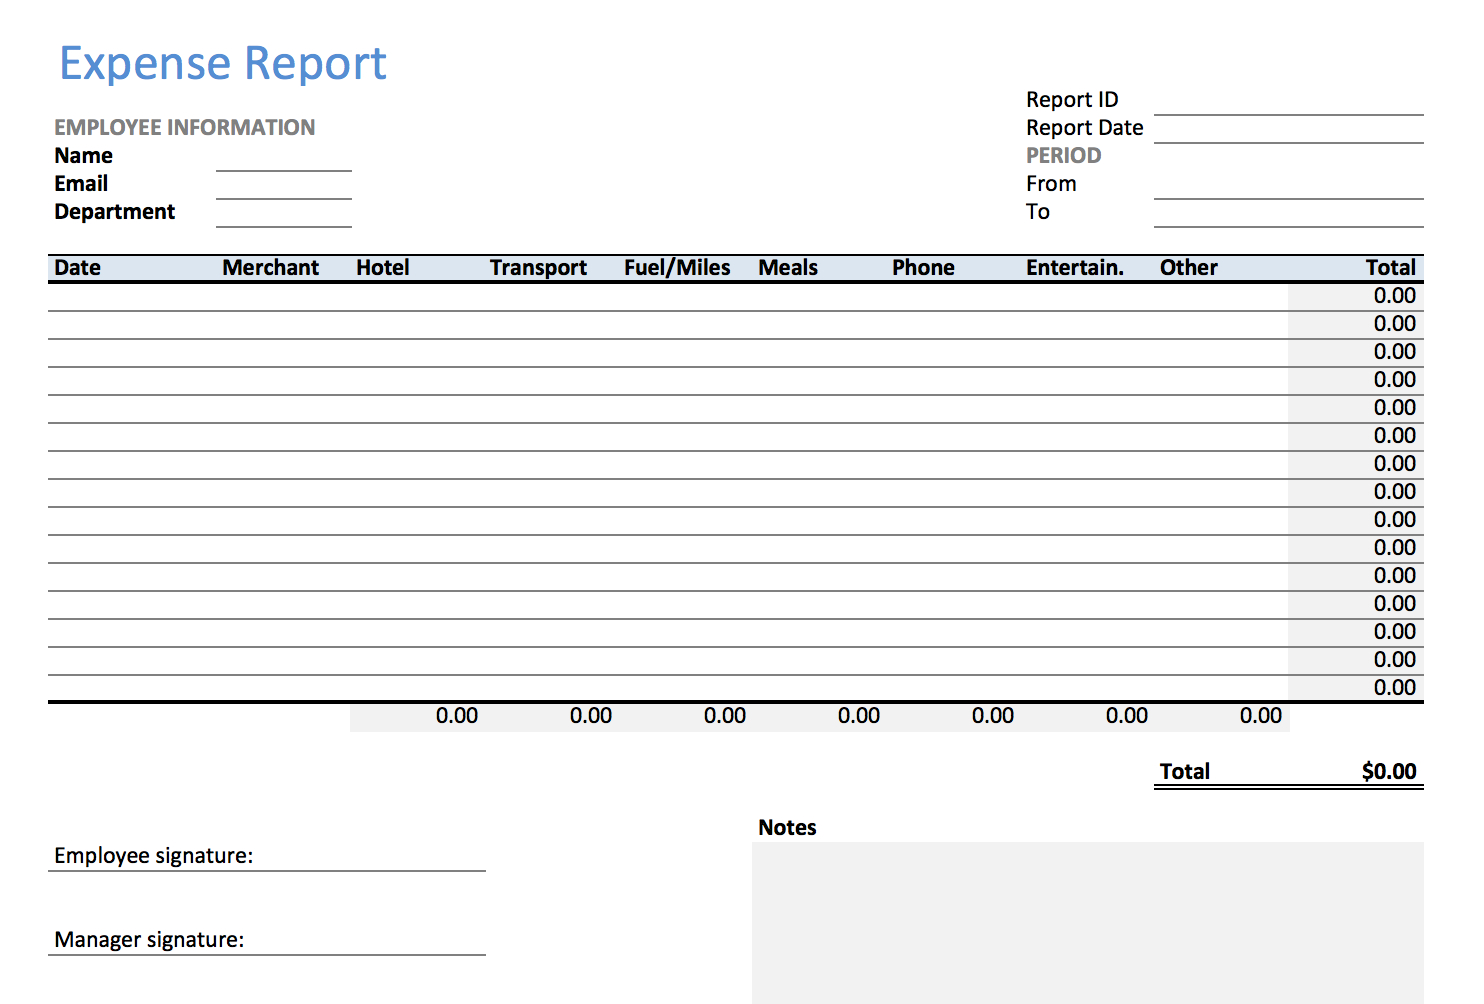 Gas Mileage Expense Report Template - Papele With Gas Mileage Expense Report Template